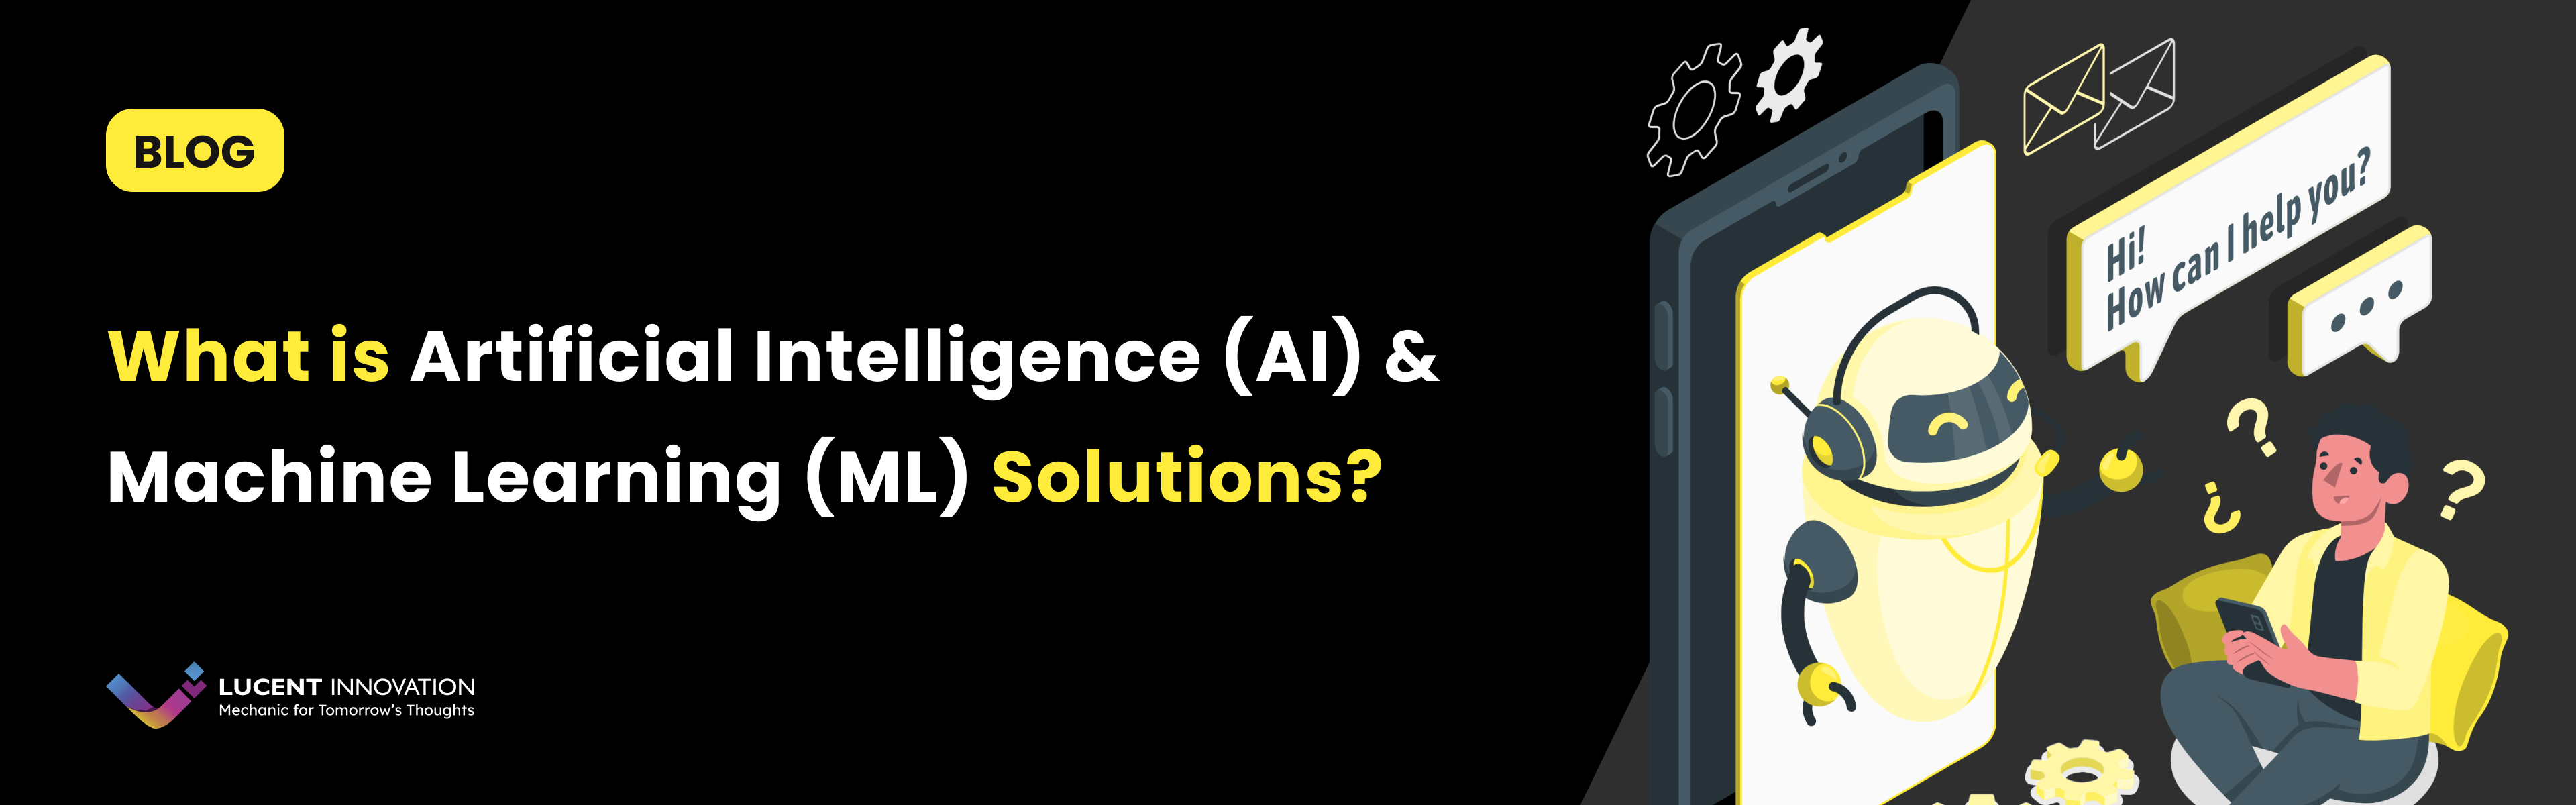 What is Artificial Intelligence (AI) & Machine Learning (ML) Solutions?